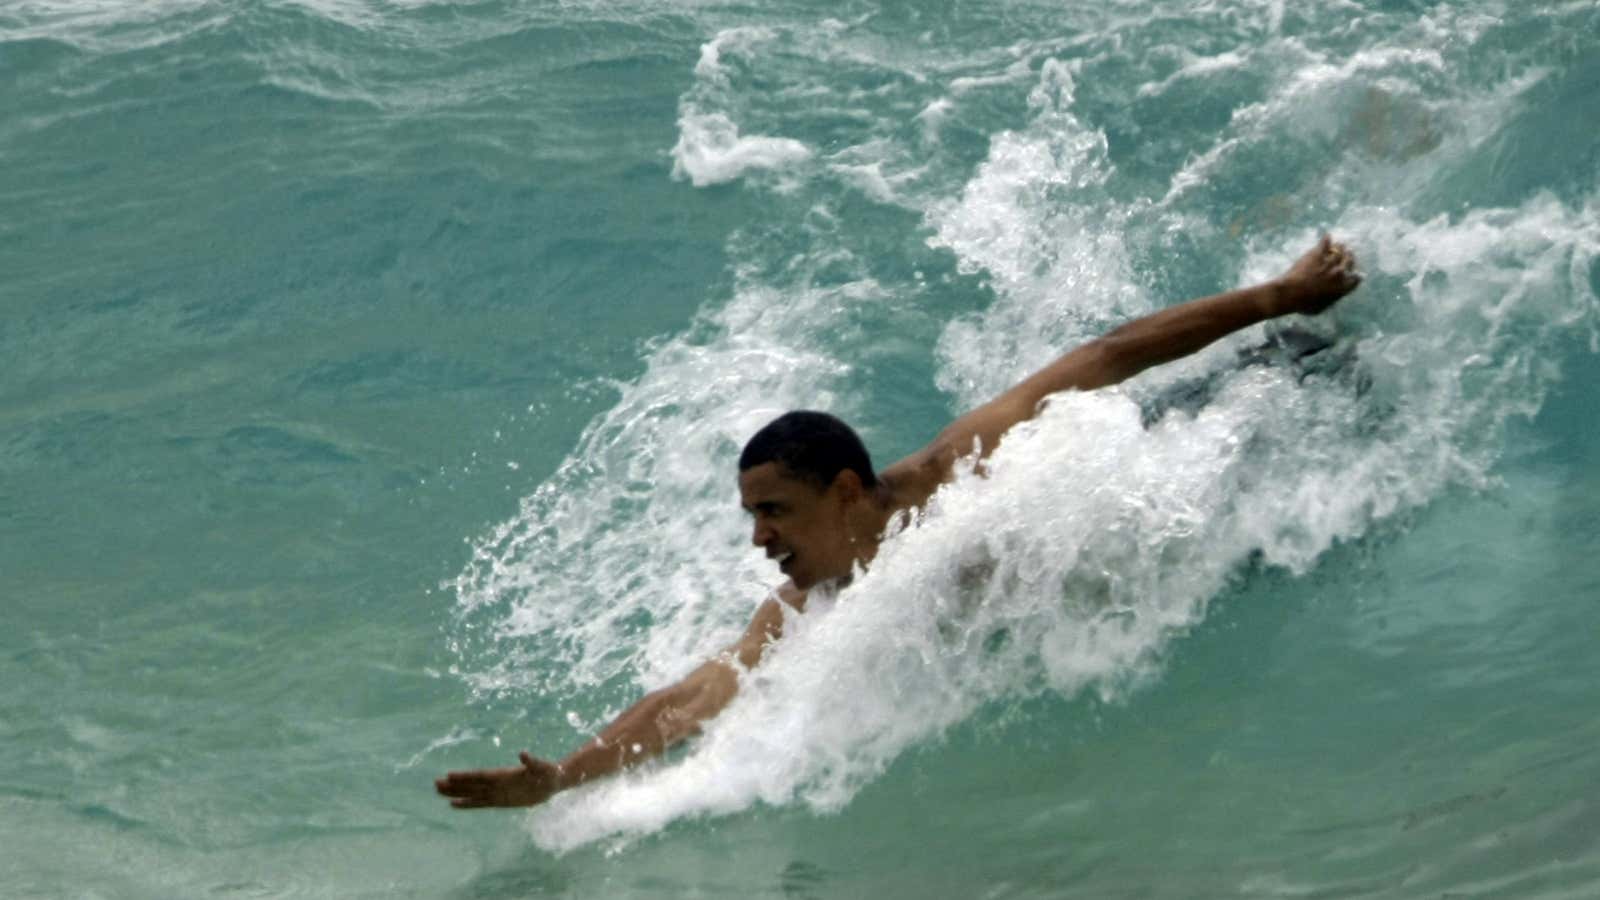 Rougher waters this time? President Obama bodysurfing during a previous vacation in Hawaii. He headed back there after Congress approved a fiscal cliff deal—but it’s hardly smooth waters for markets and the economy now.